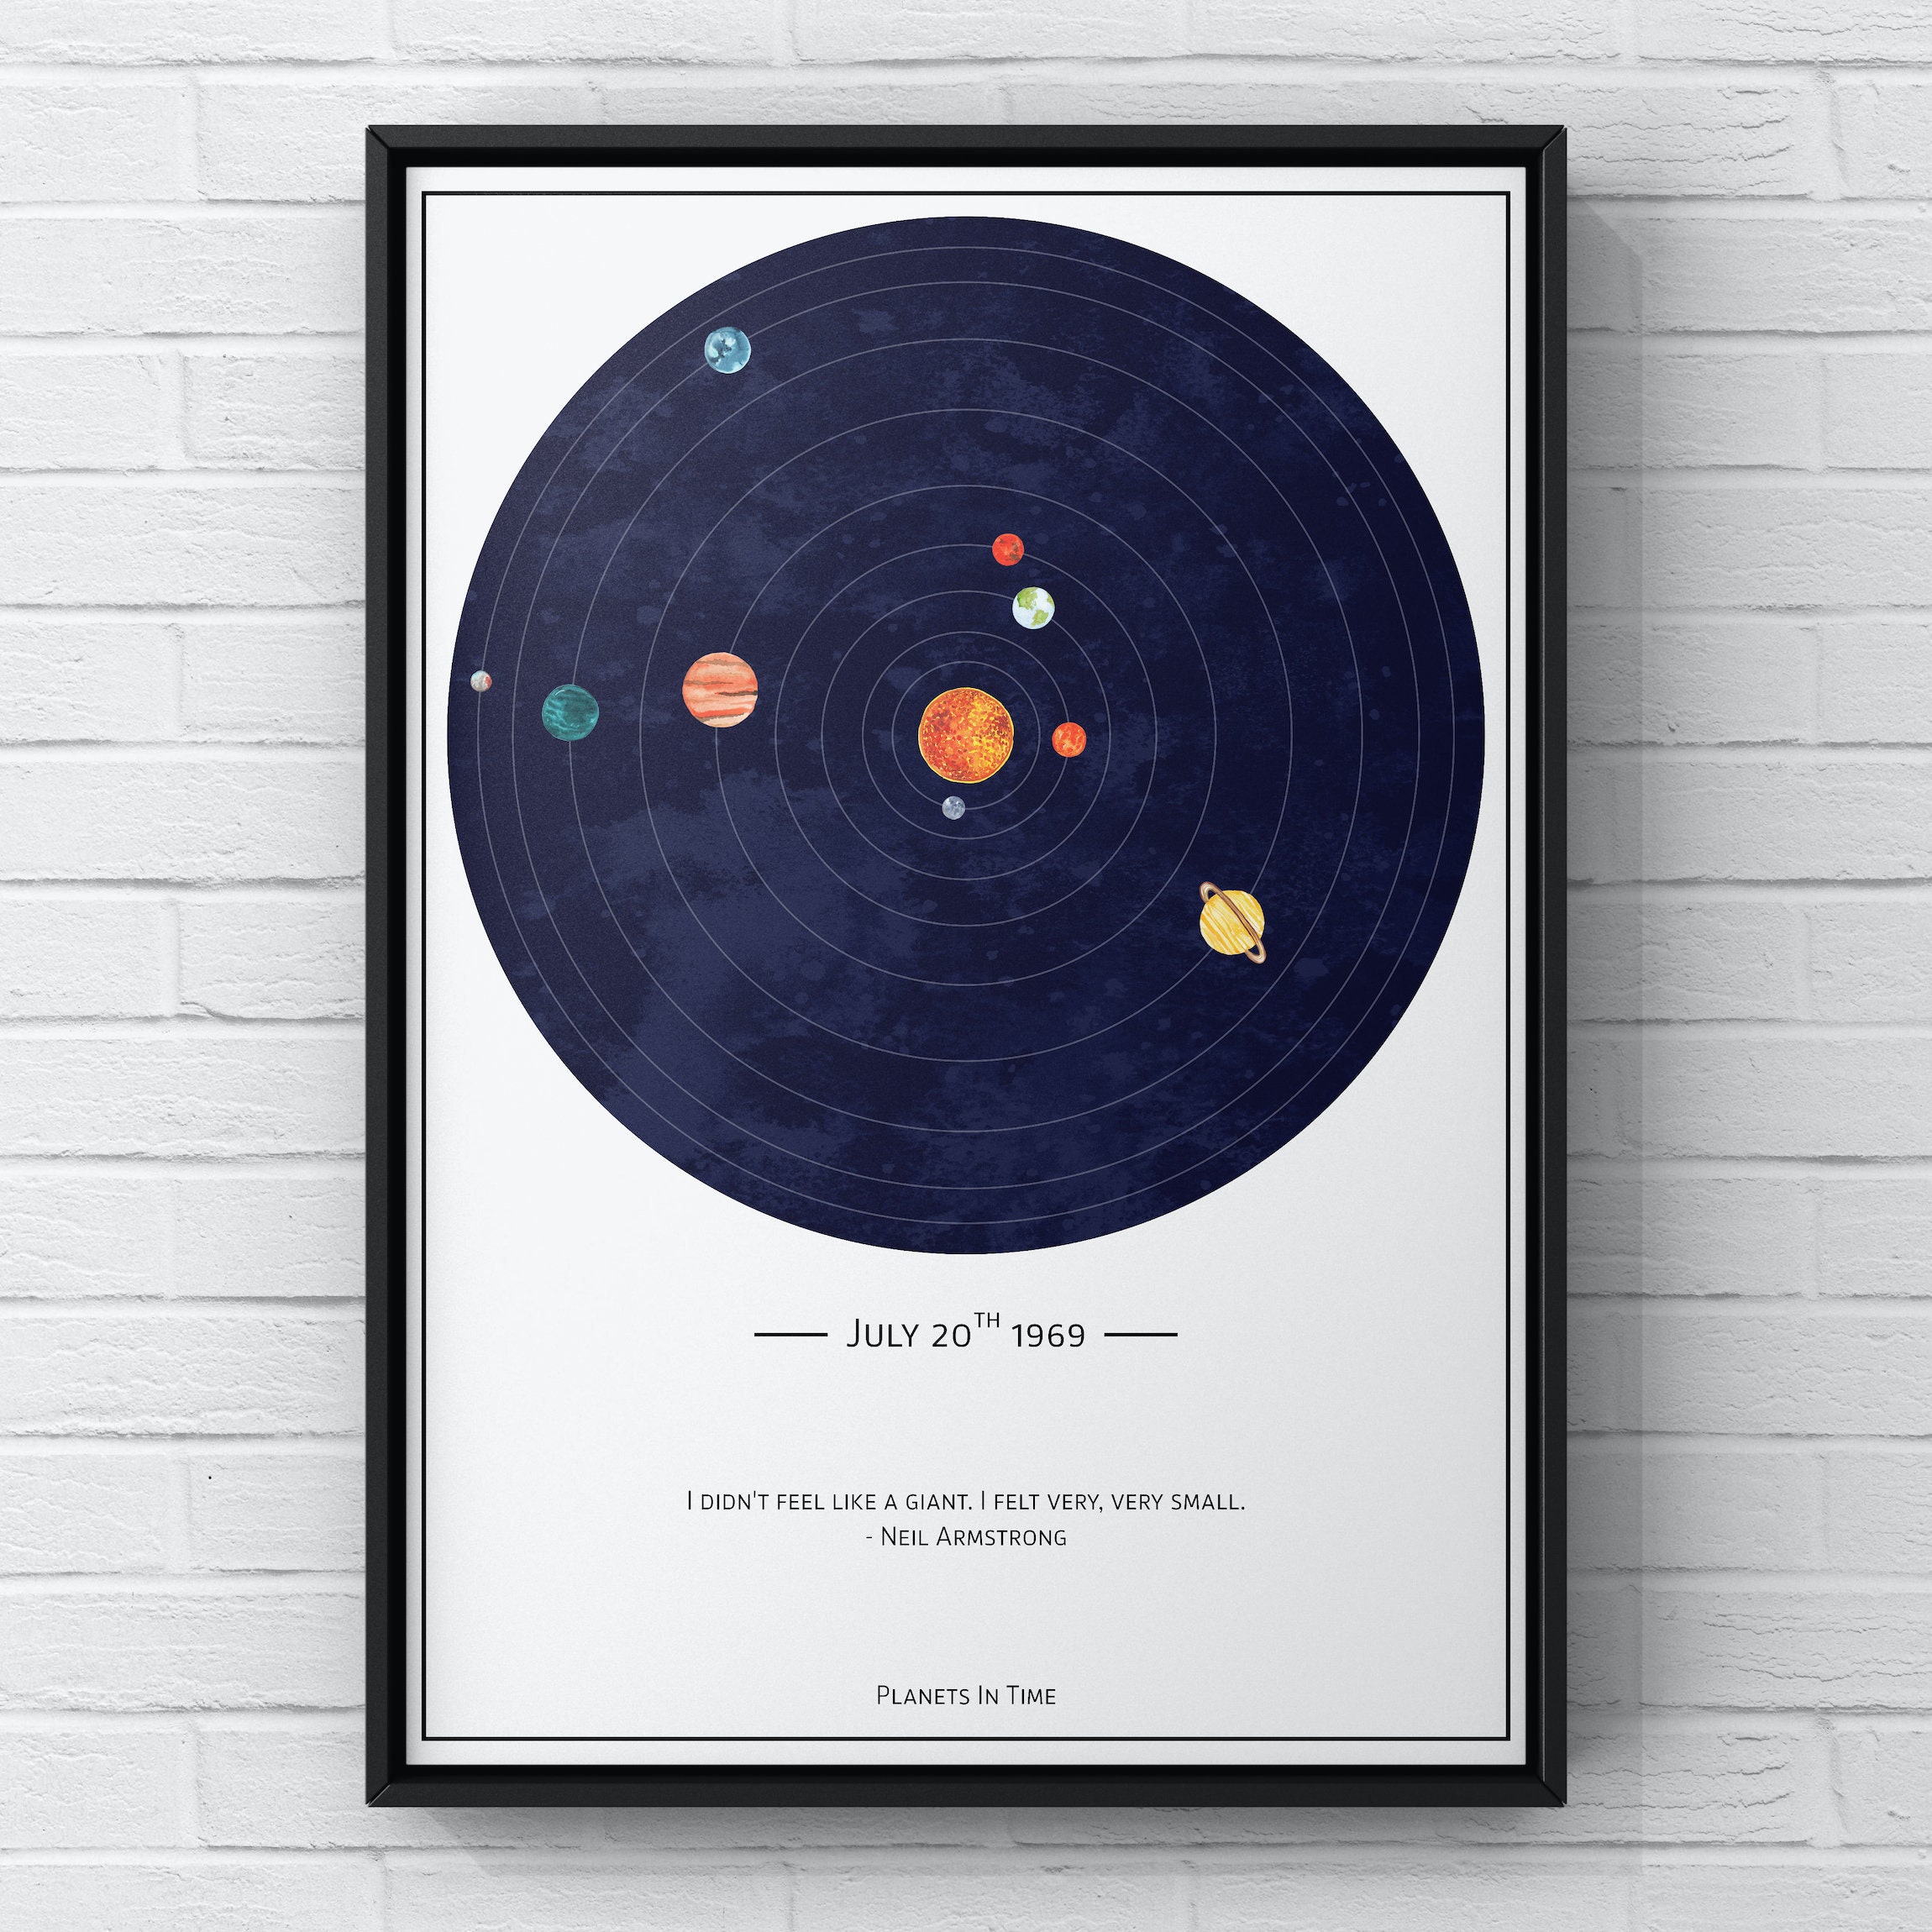 NASA Paint and design your own Solar System